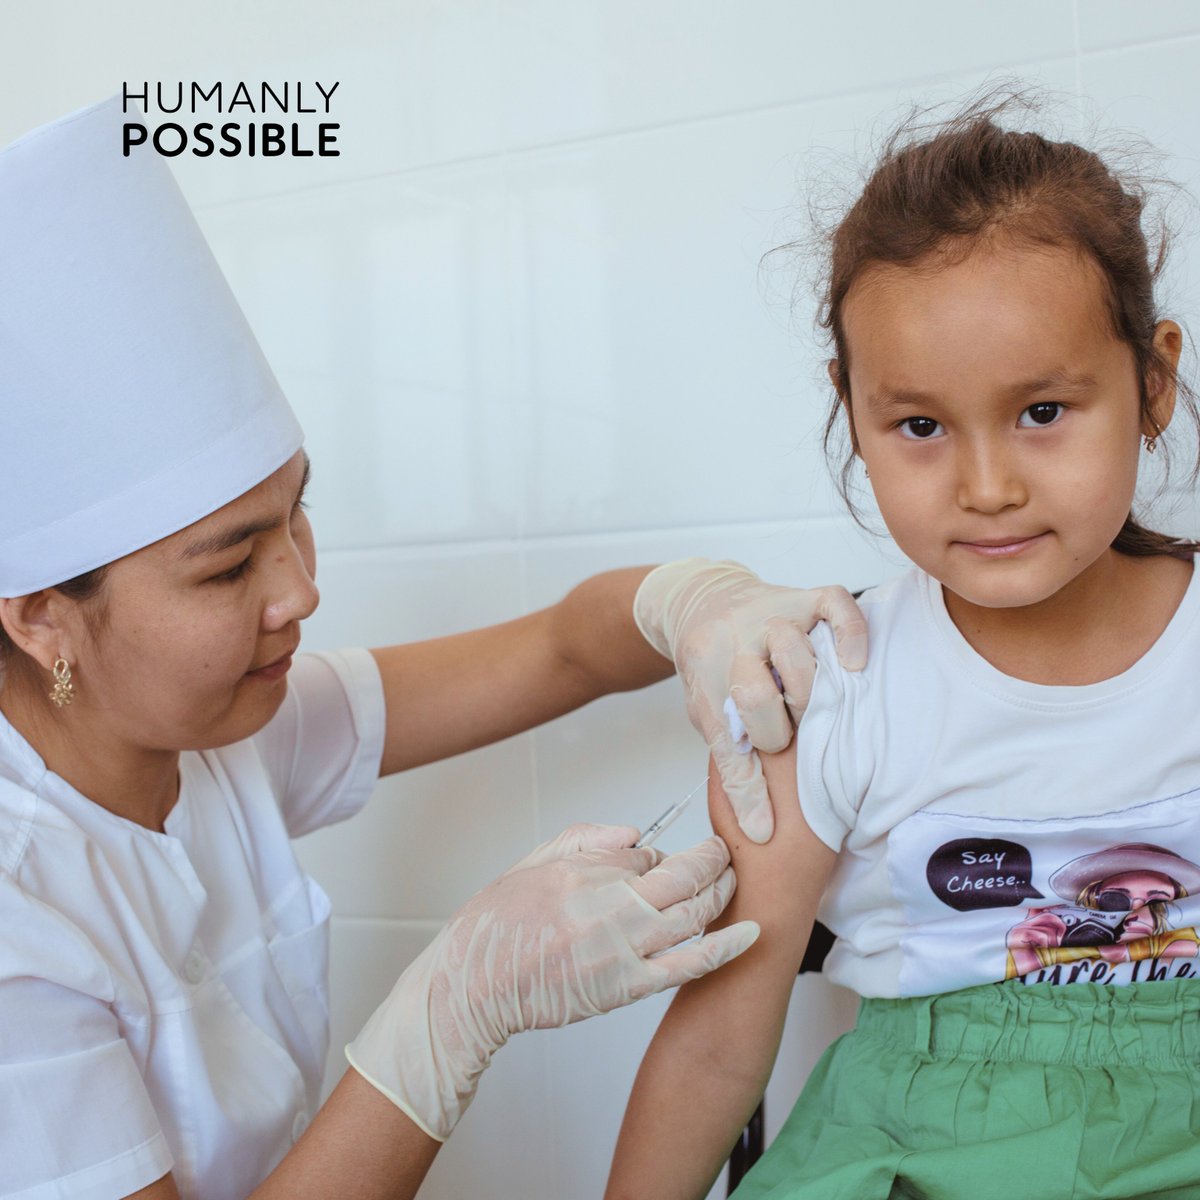 This year @UNICEF celebrates Expanded Programme on Immunization turns 50 🙌 Meet Dilbar Ospanova, a real-life health #hero of this programme. She helps to protect children’s health and well-being by administering measles and rubella vaccines to children at a health facility in